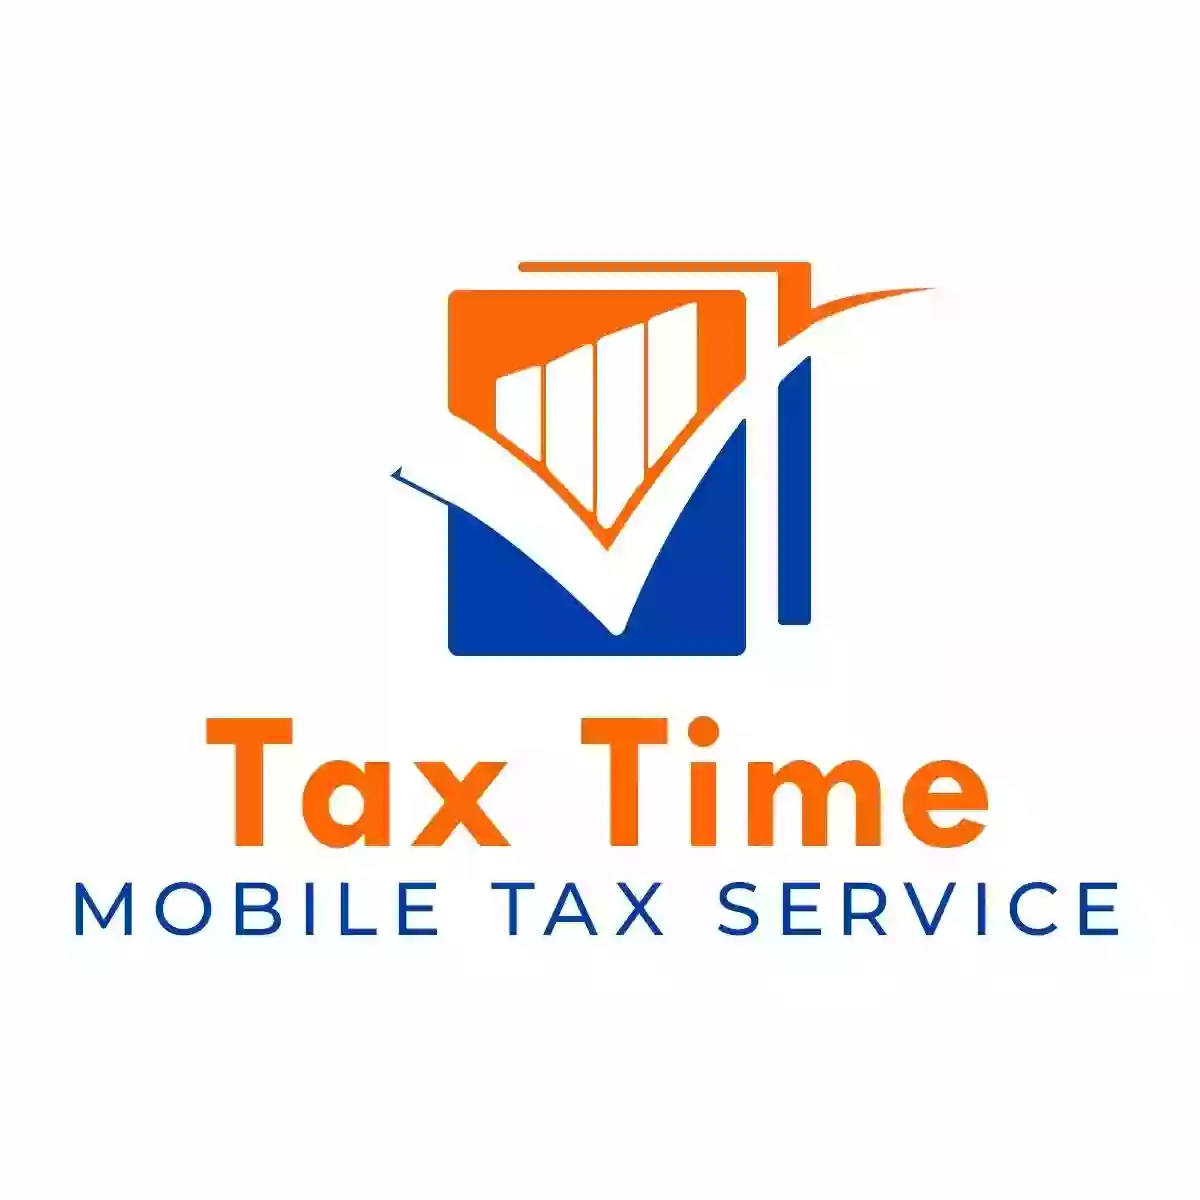 Tax Time Mobile Tax Service